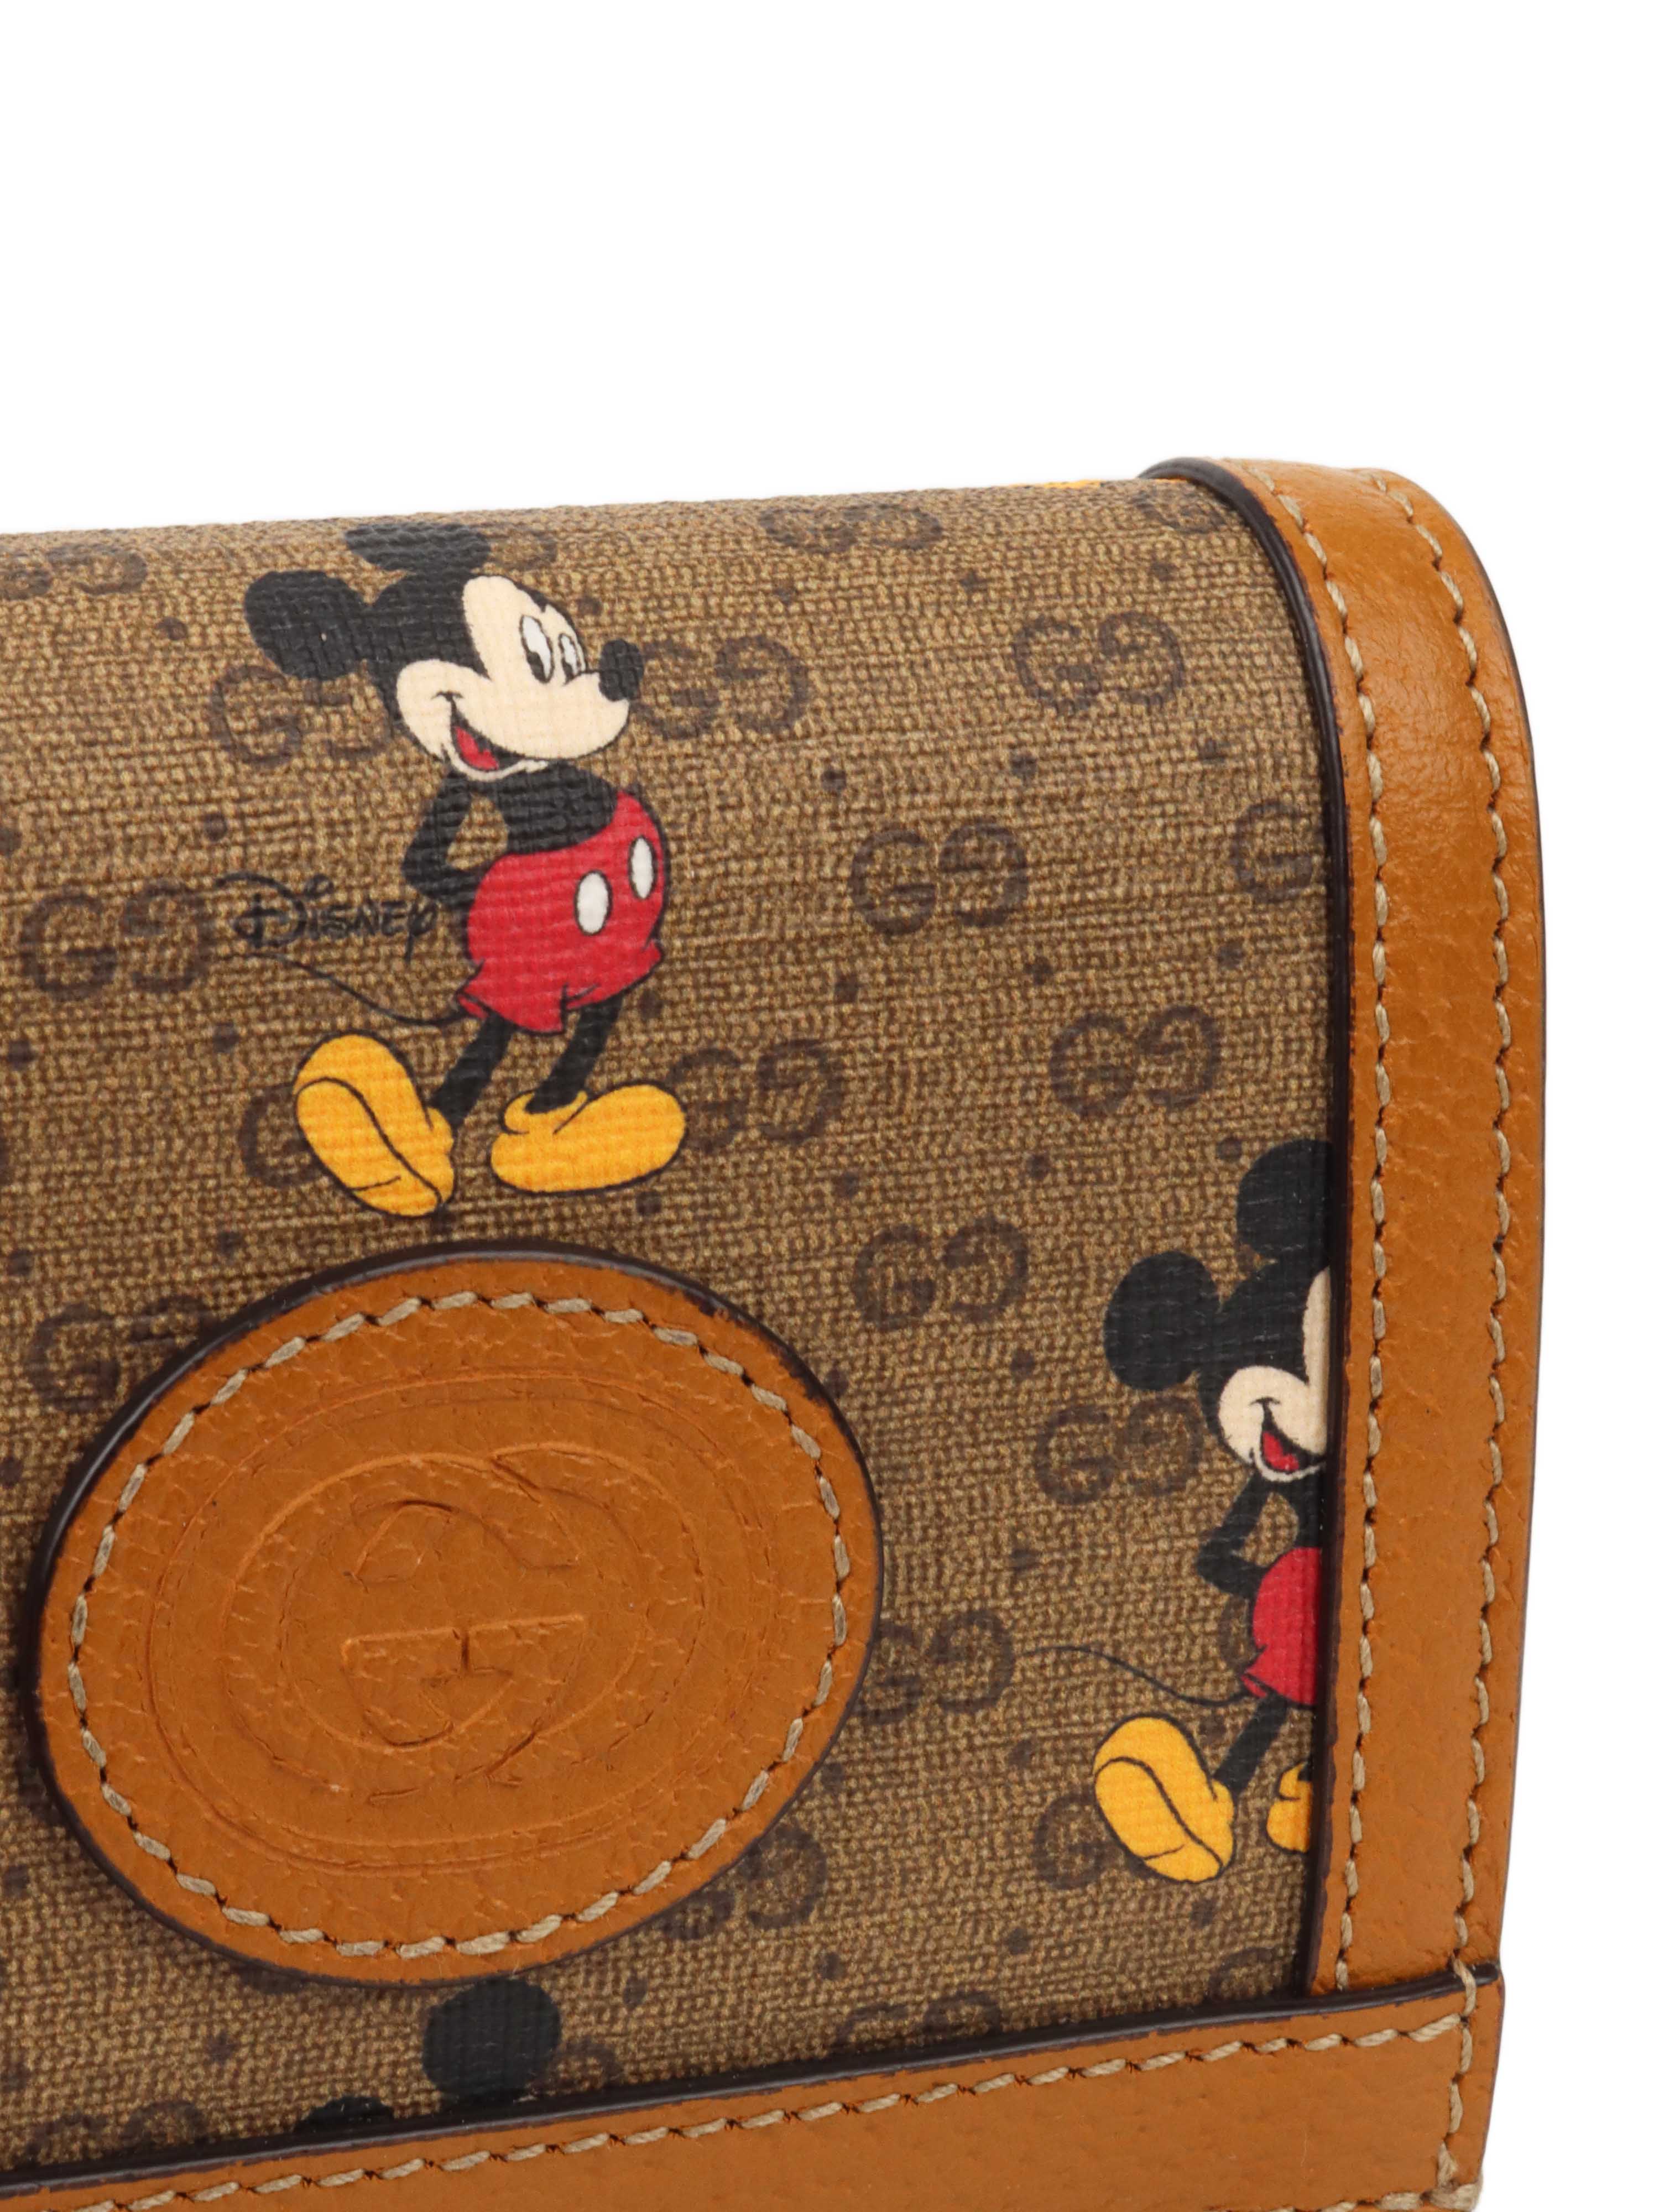 Gucci x Disney Limited Edition Mickey Mouse Wallet.